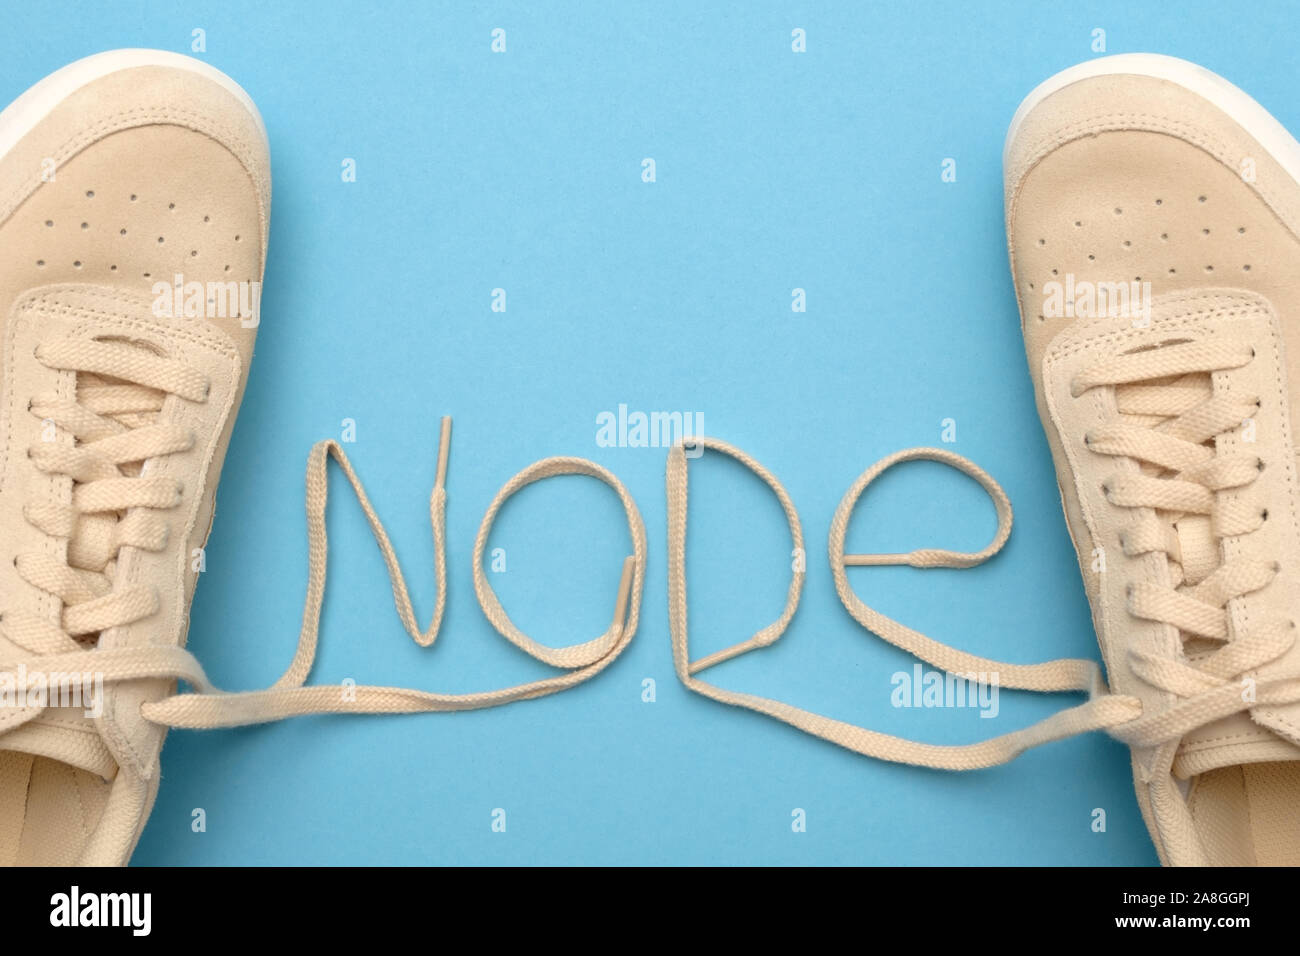 New women sneakers with laces in node text. Flat lay on blue background. Stock Photo